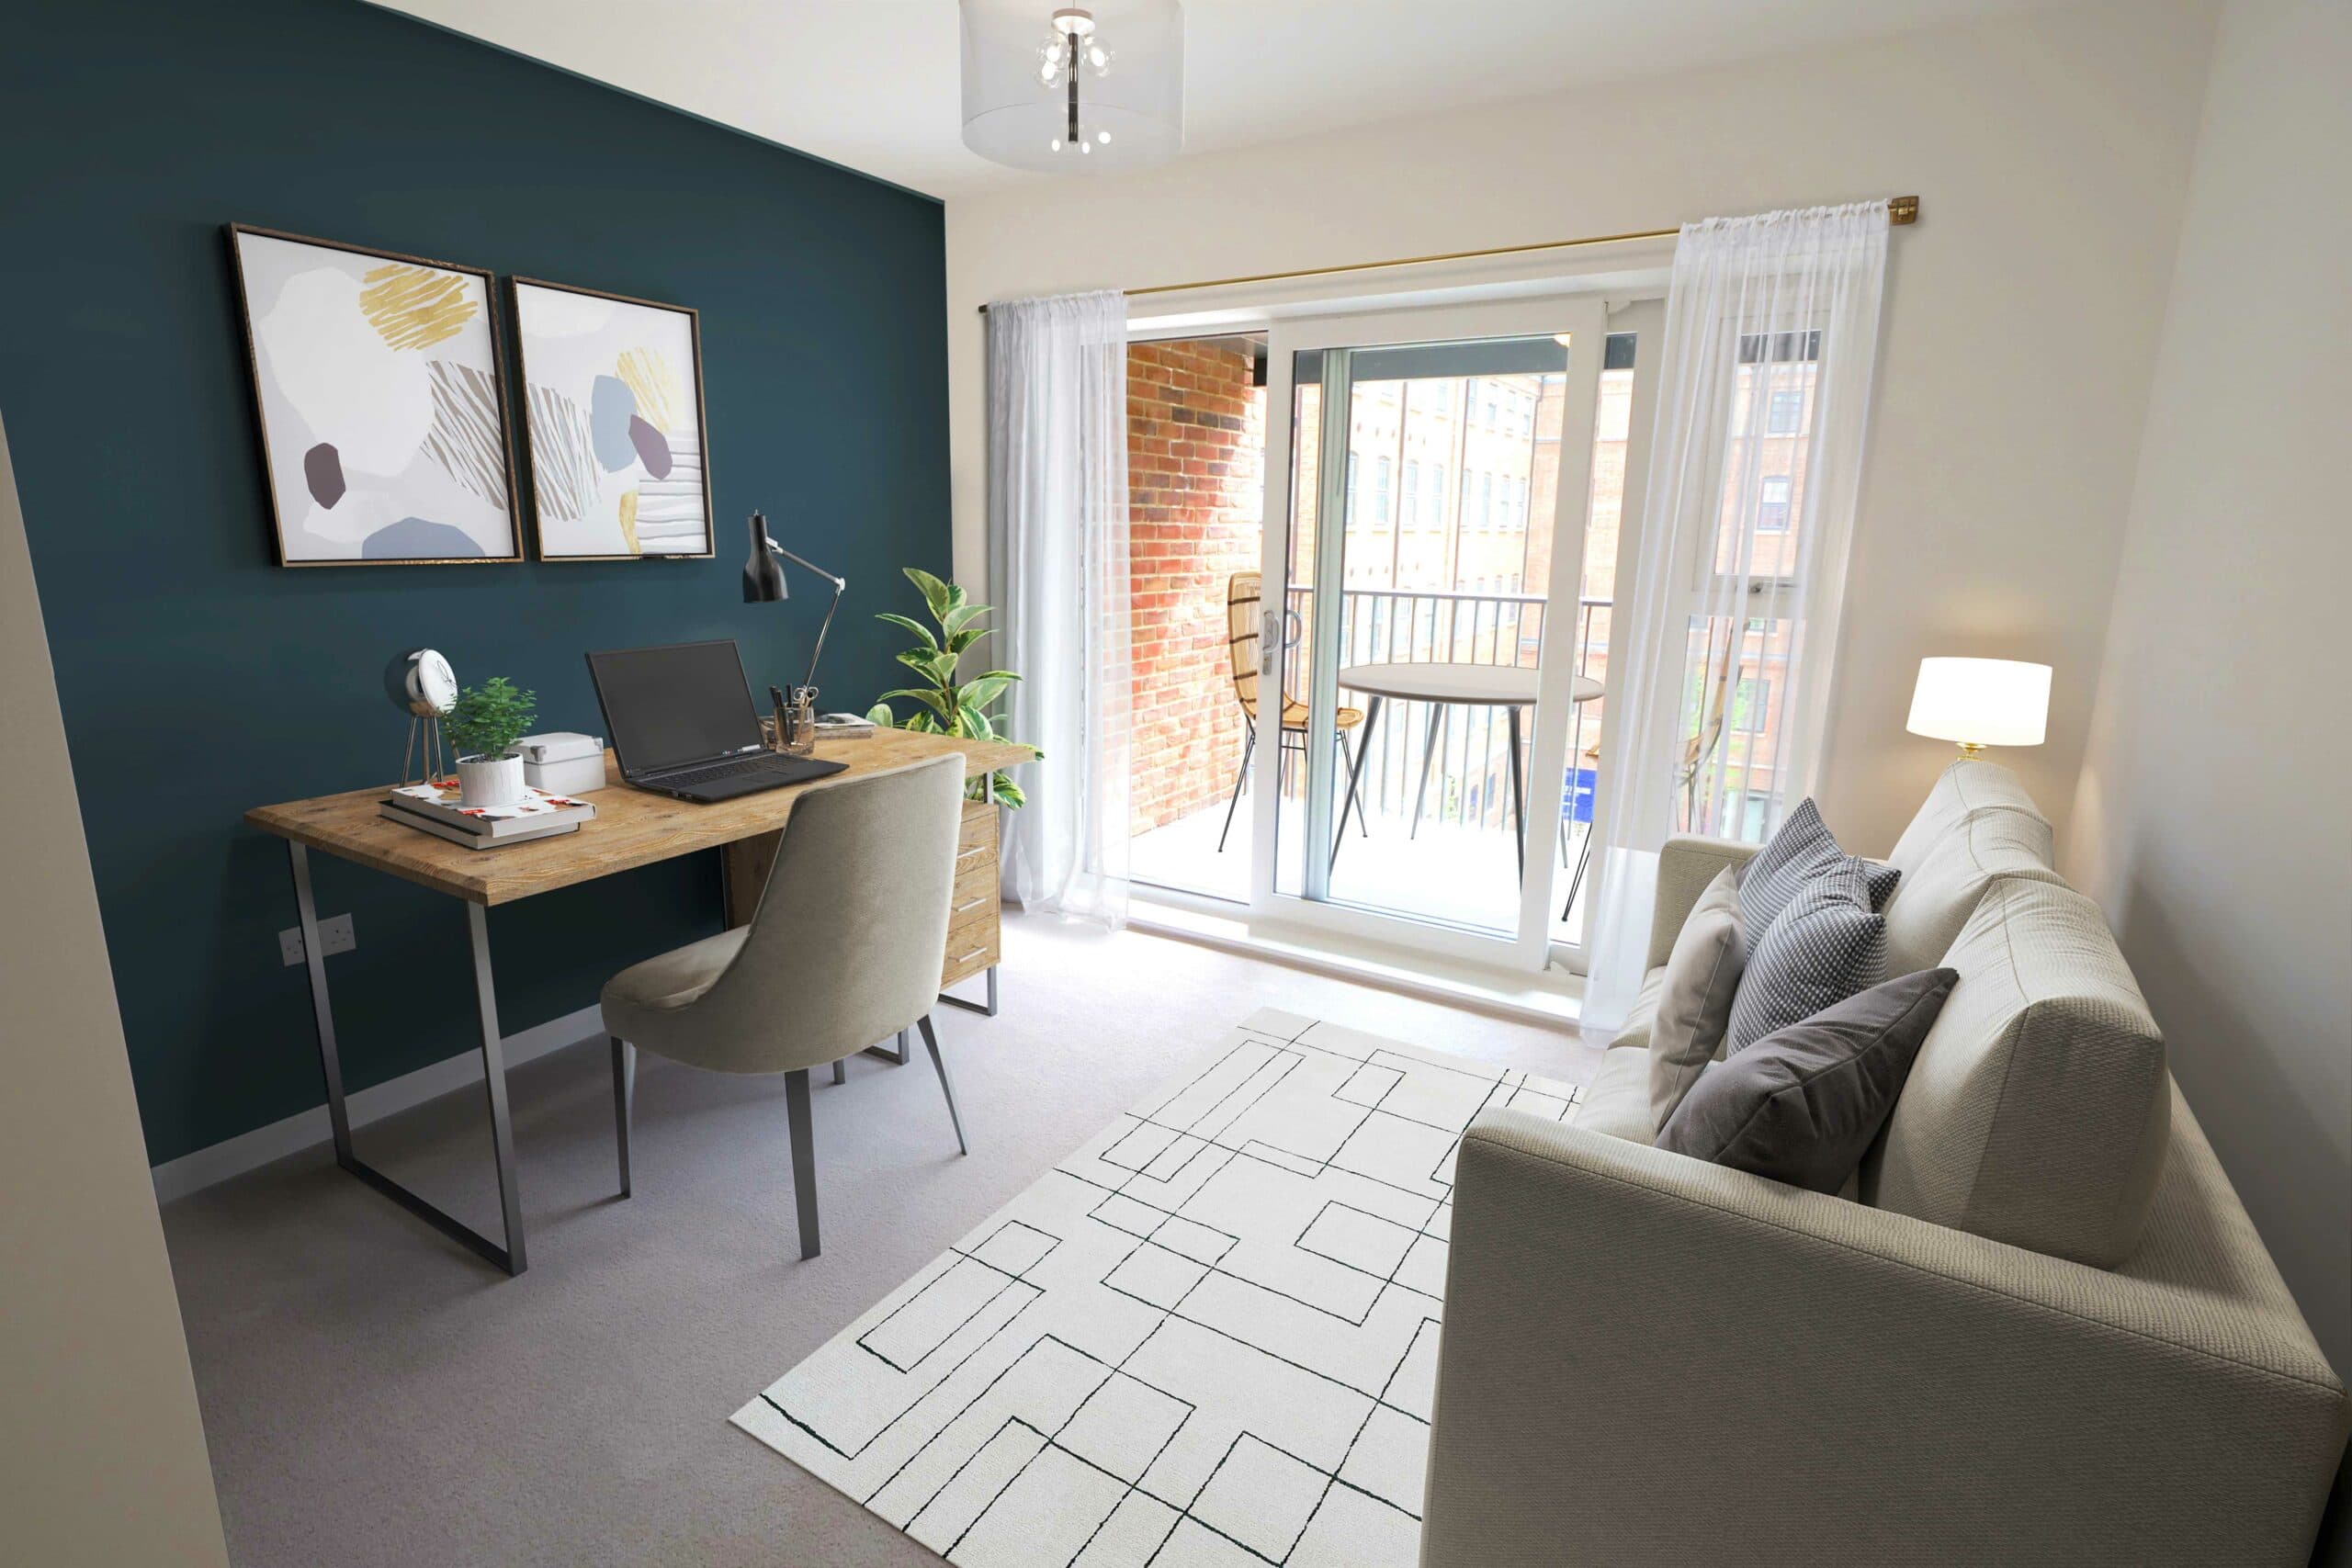 Image of the Horlicks Quarter development by Sovereign - available to purchase through Shared Ownership on Share to Buy!